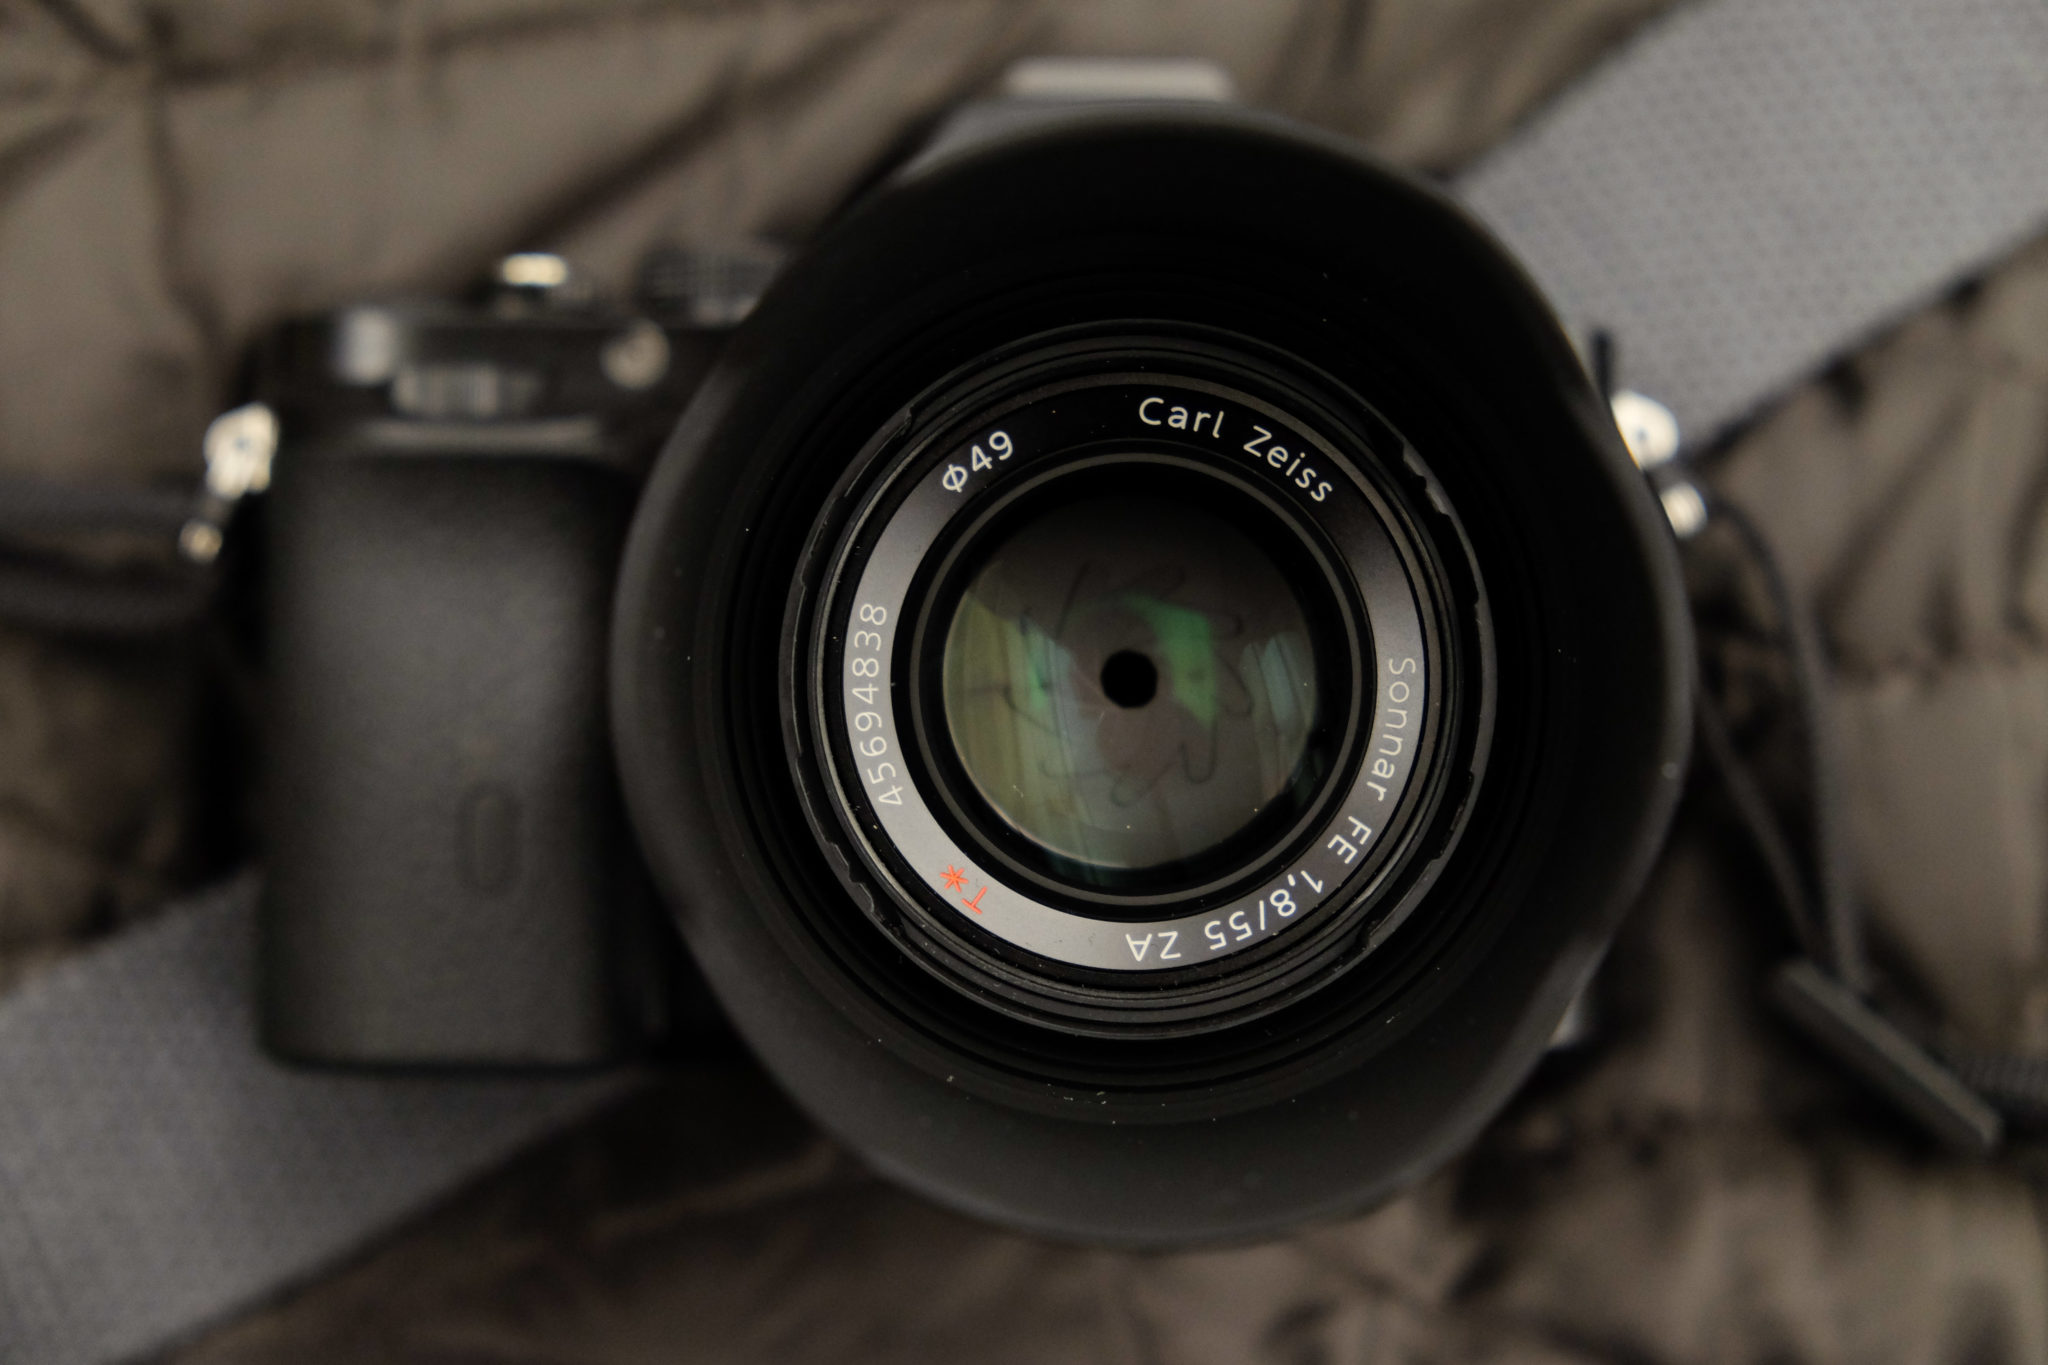 Review: Sony 55mm f1.8 (Full Frame E Mount) - The Phoblographer